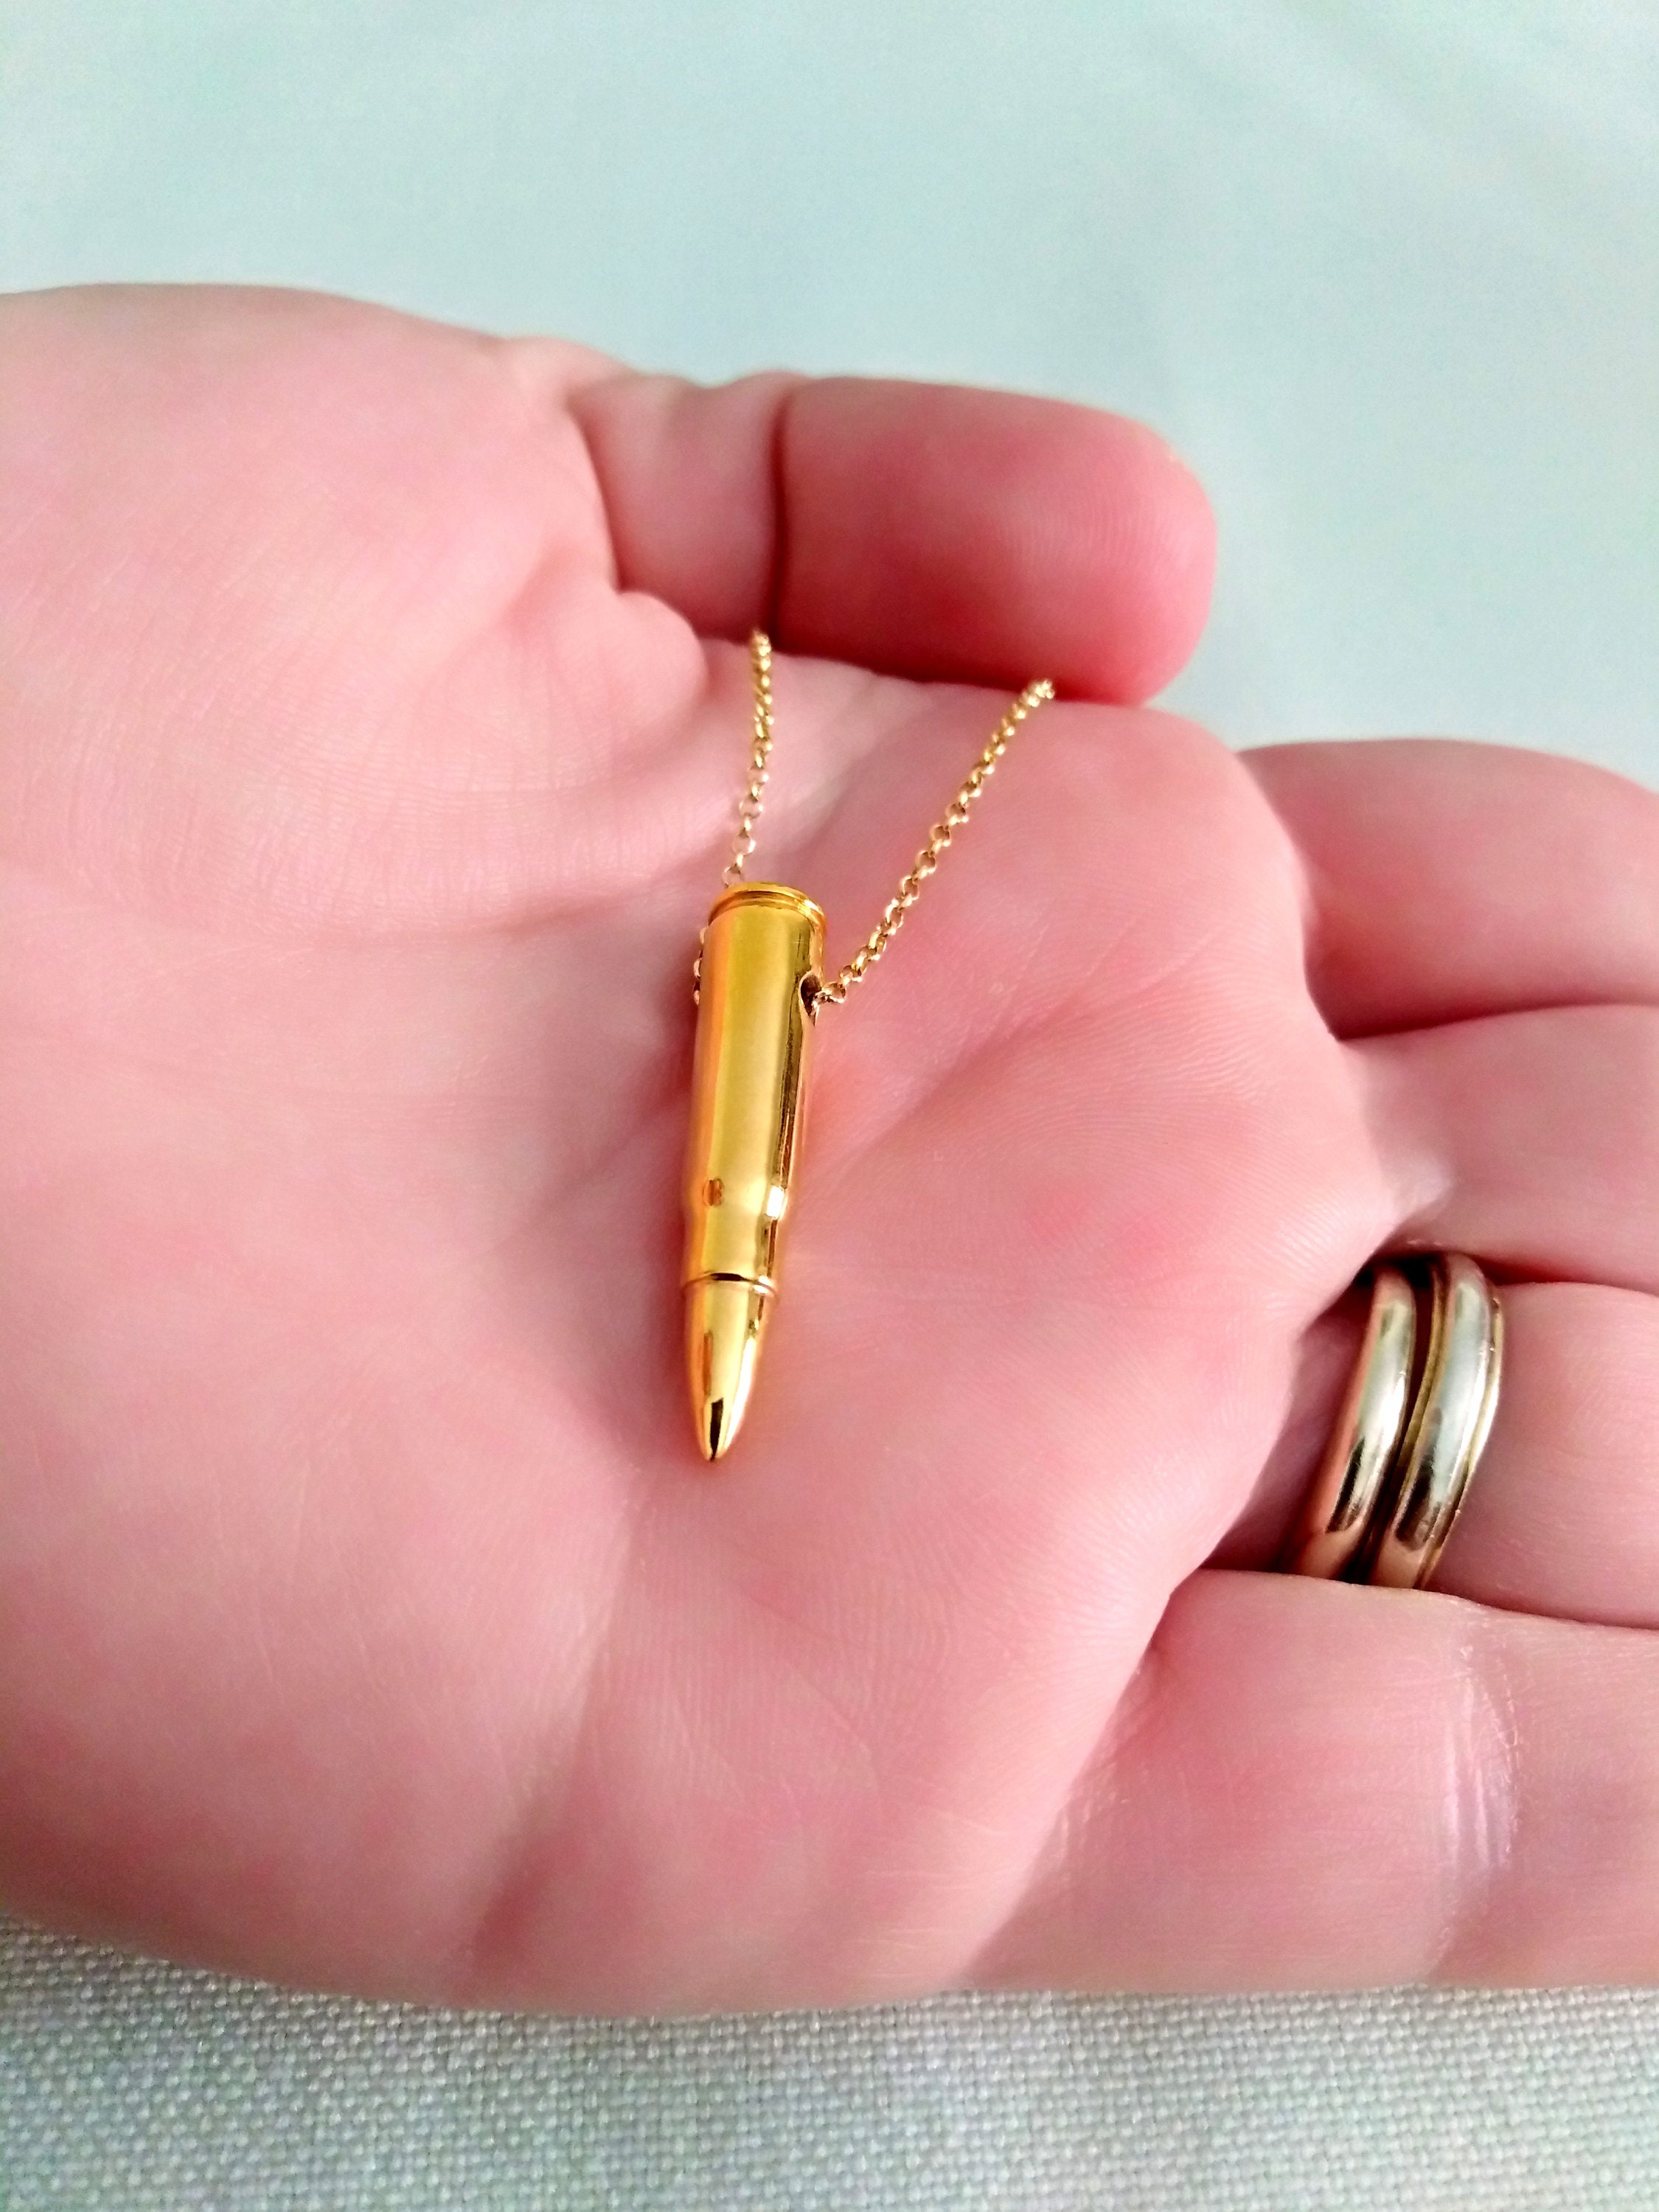 Hand Carved Bullet Pendant Sculpture Crystal Pendant DIY Handmade Jewelry Decoration Gift